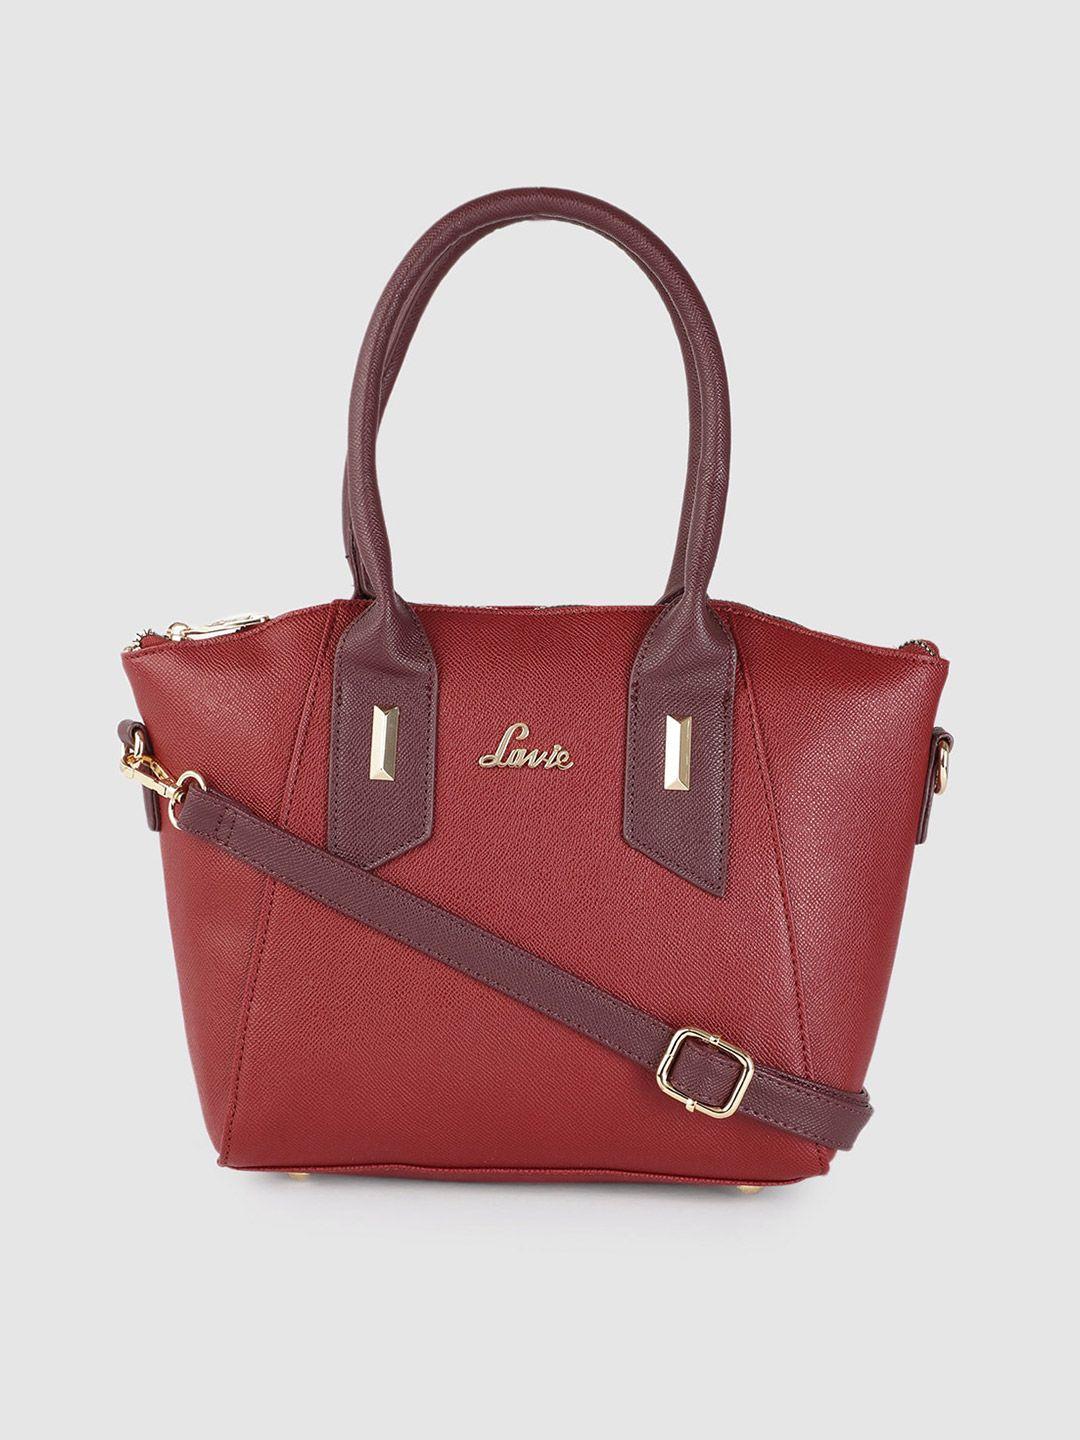 lavie tonal pammy maroon solid structured handheld bag